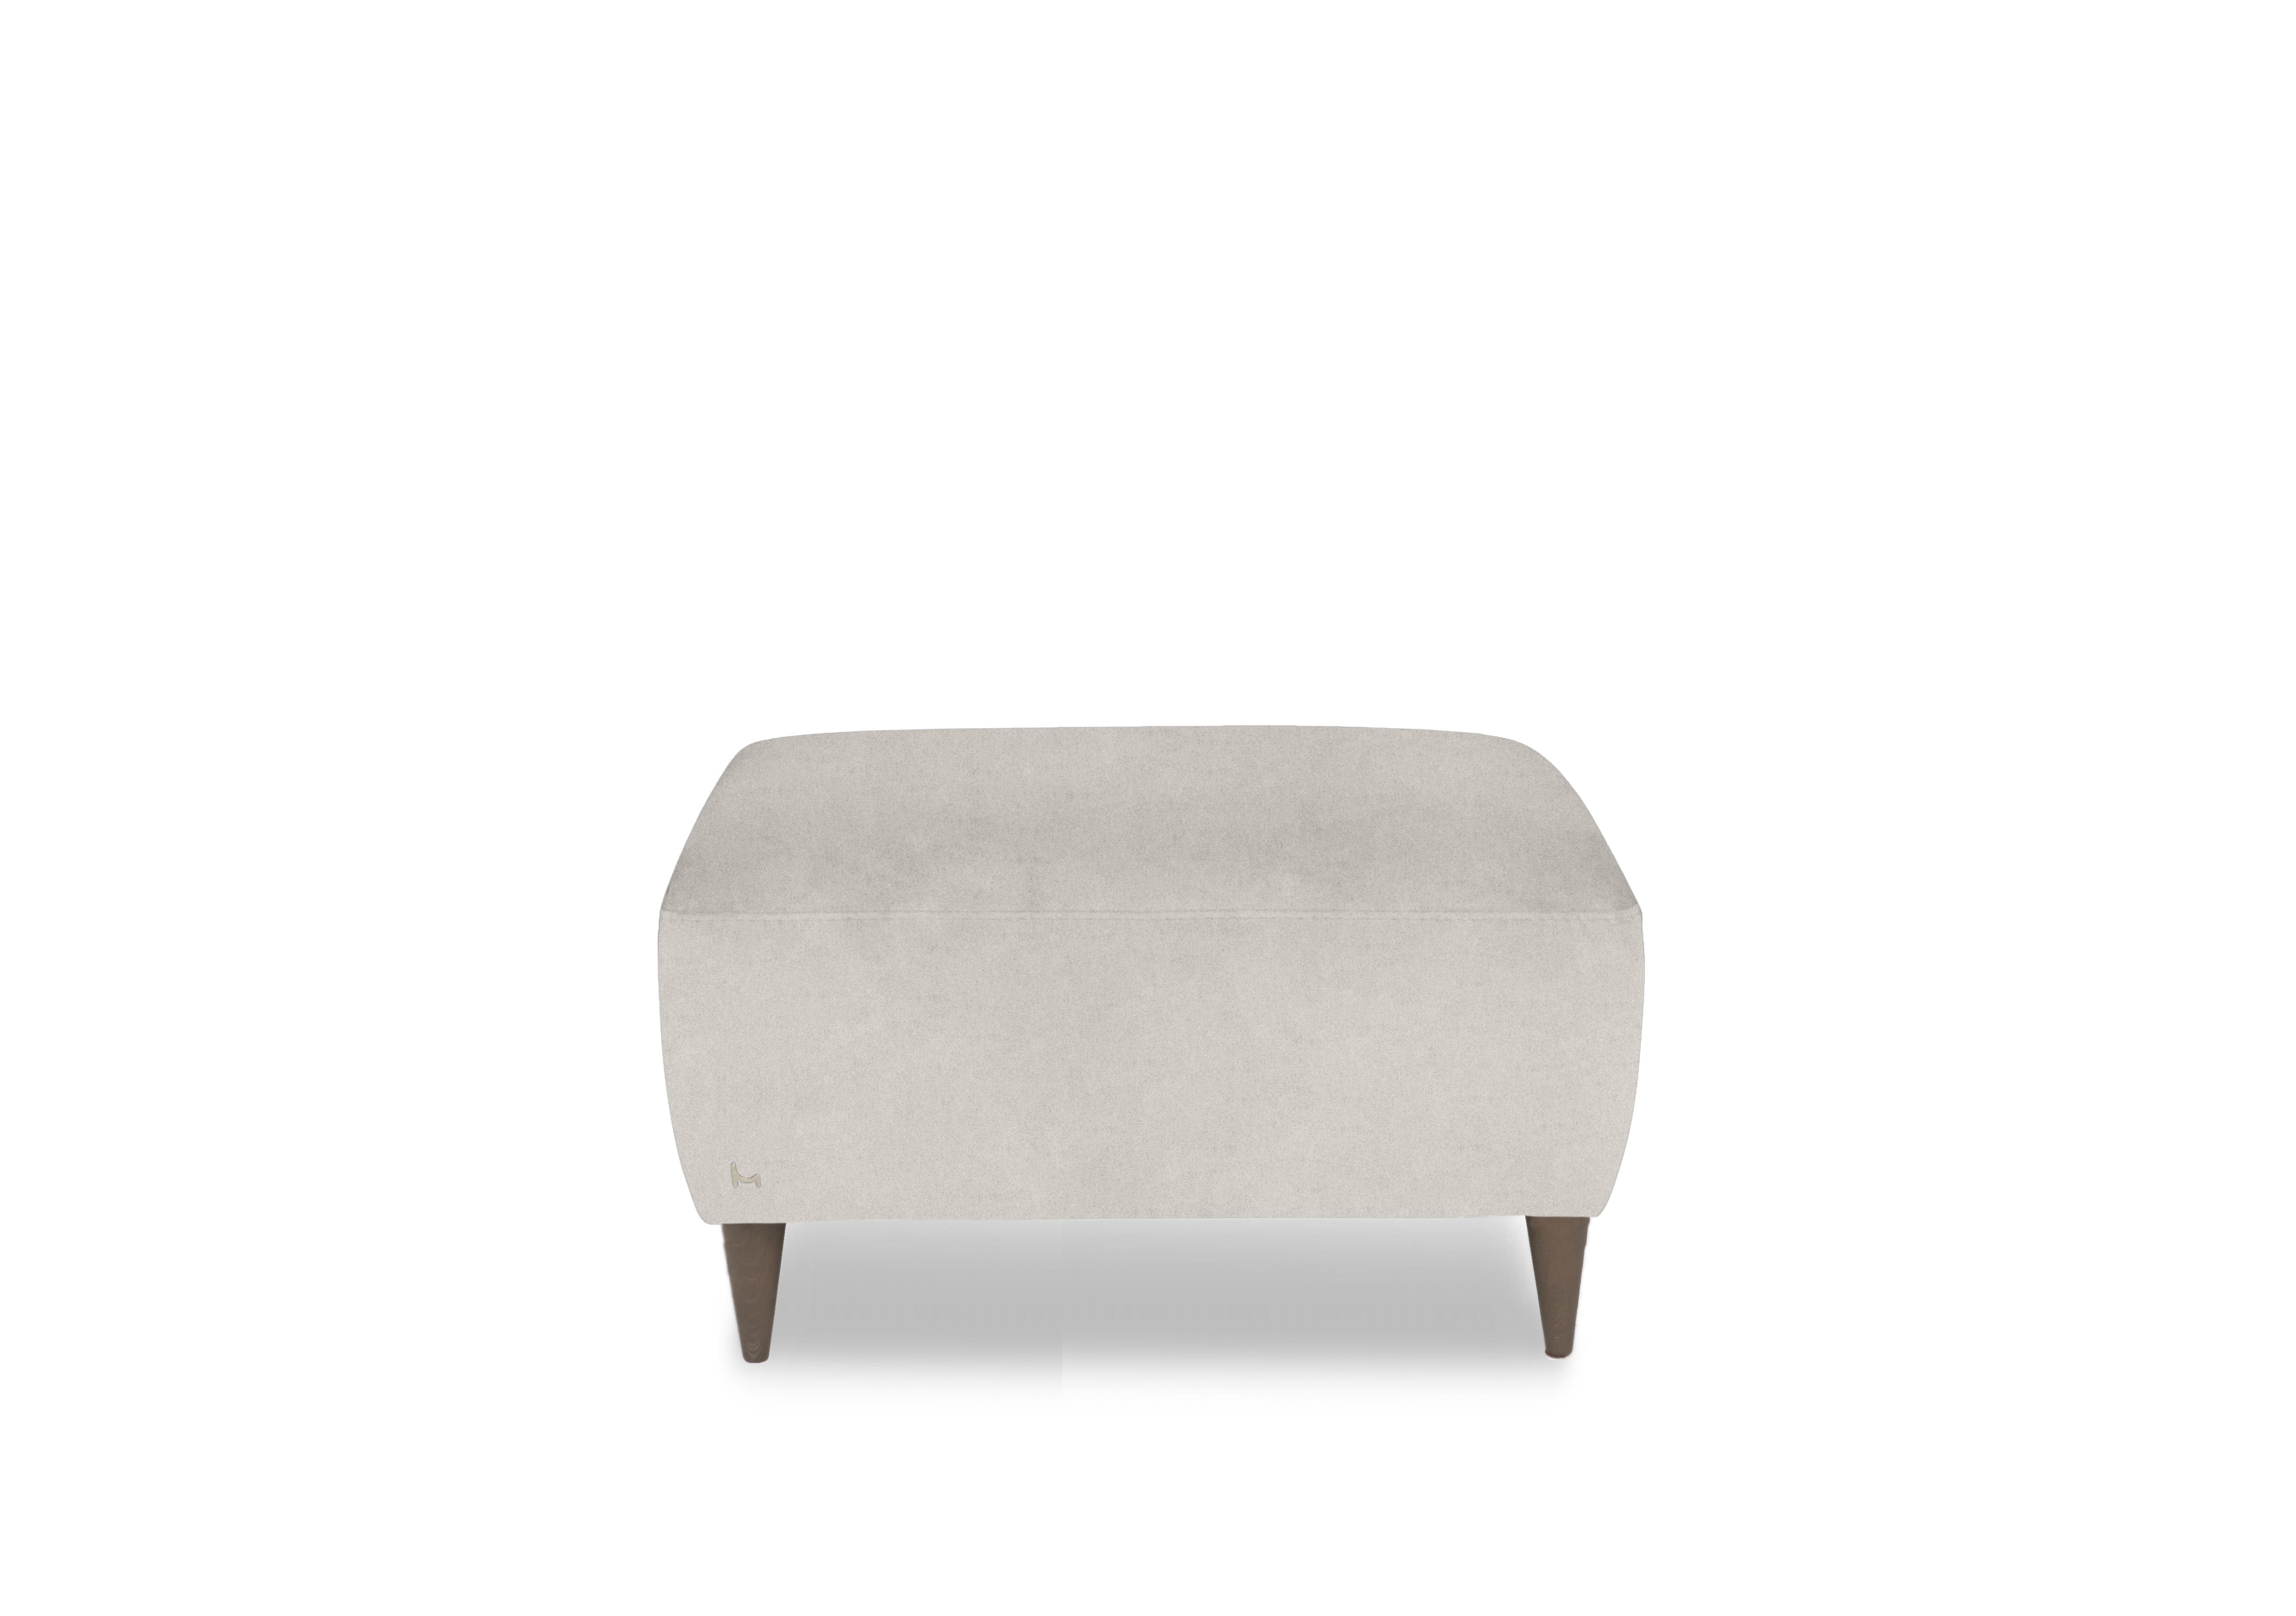 Milano Fabric Footstool in Fuente Beige To Ft on Furniture Village